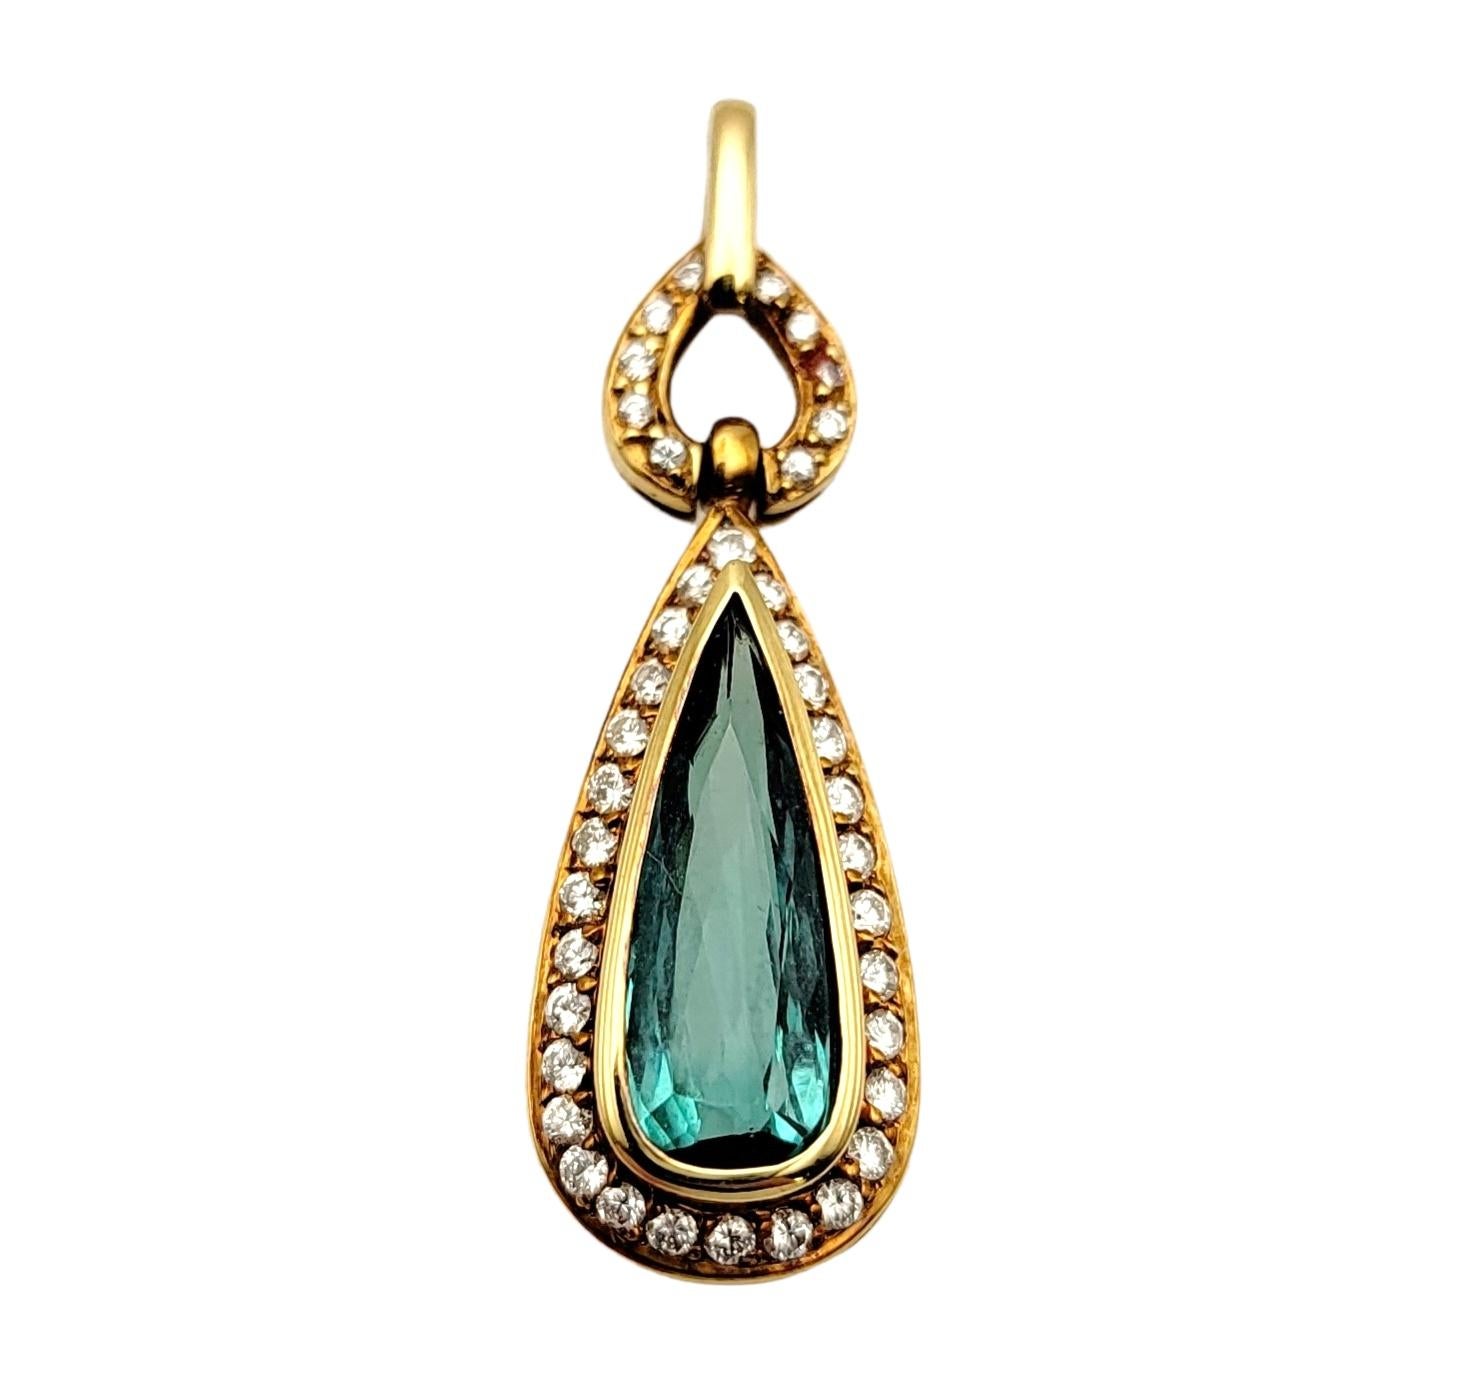 Stunningly beautiful pendant featuring a pear mixed cut tourmaline surrounded by a glittering diamond halo. The stunning bezel set blue-green tourmaline pops elegantly against the warm rose gold setting, while the  dazzling diamond halo really